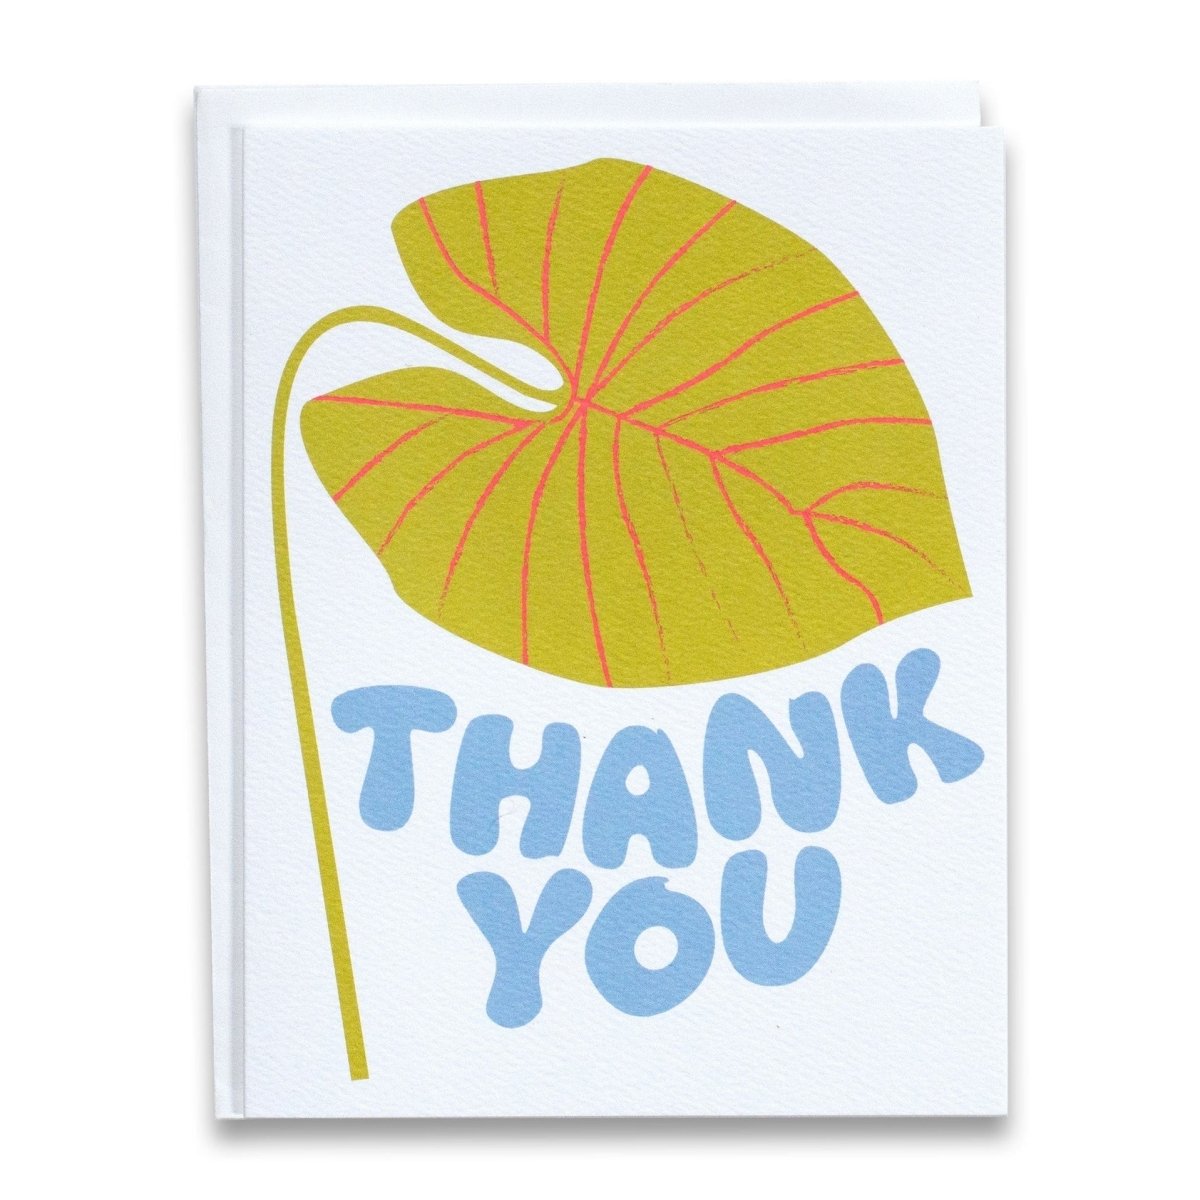 White card with a single green and pink Monstera leaf illustration. Front of card reads: "THANK YOU" in blue bubble script. Made with recycled paper by Banquet Atelier in Vancouver, British Columbia, Canada.